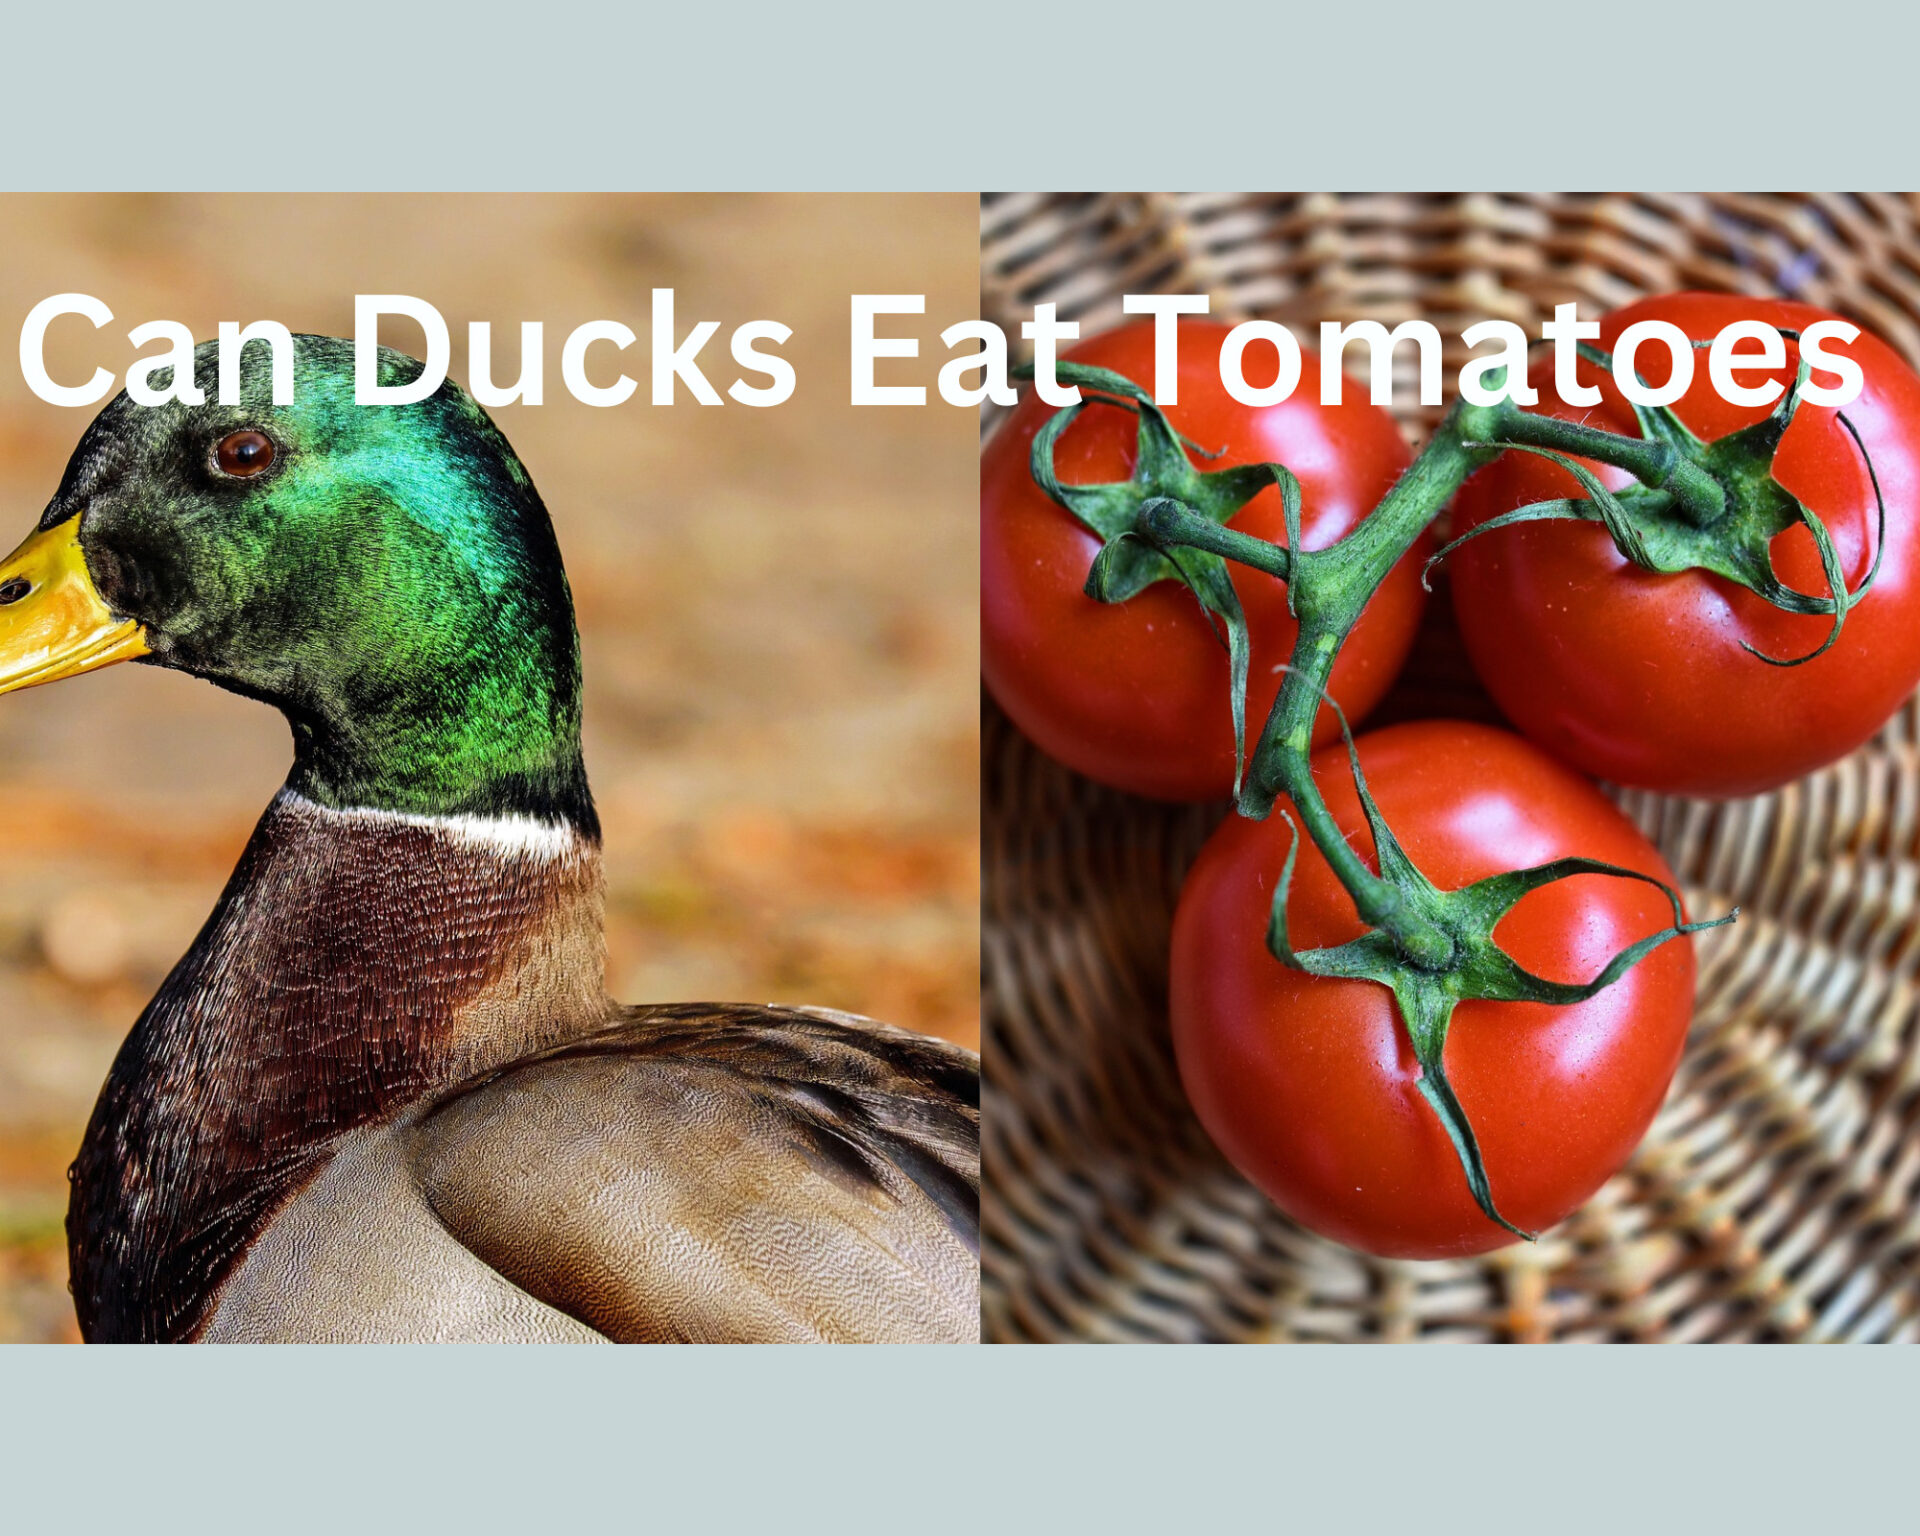 Can Ducks Eat Tomatoes? (Pros and Cons)